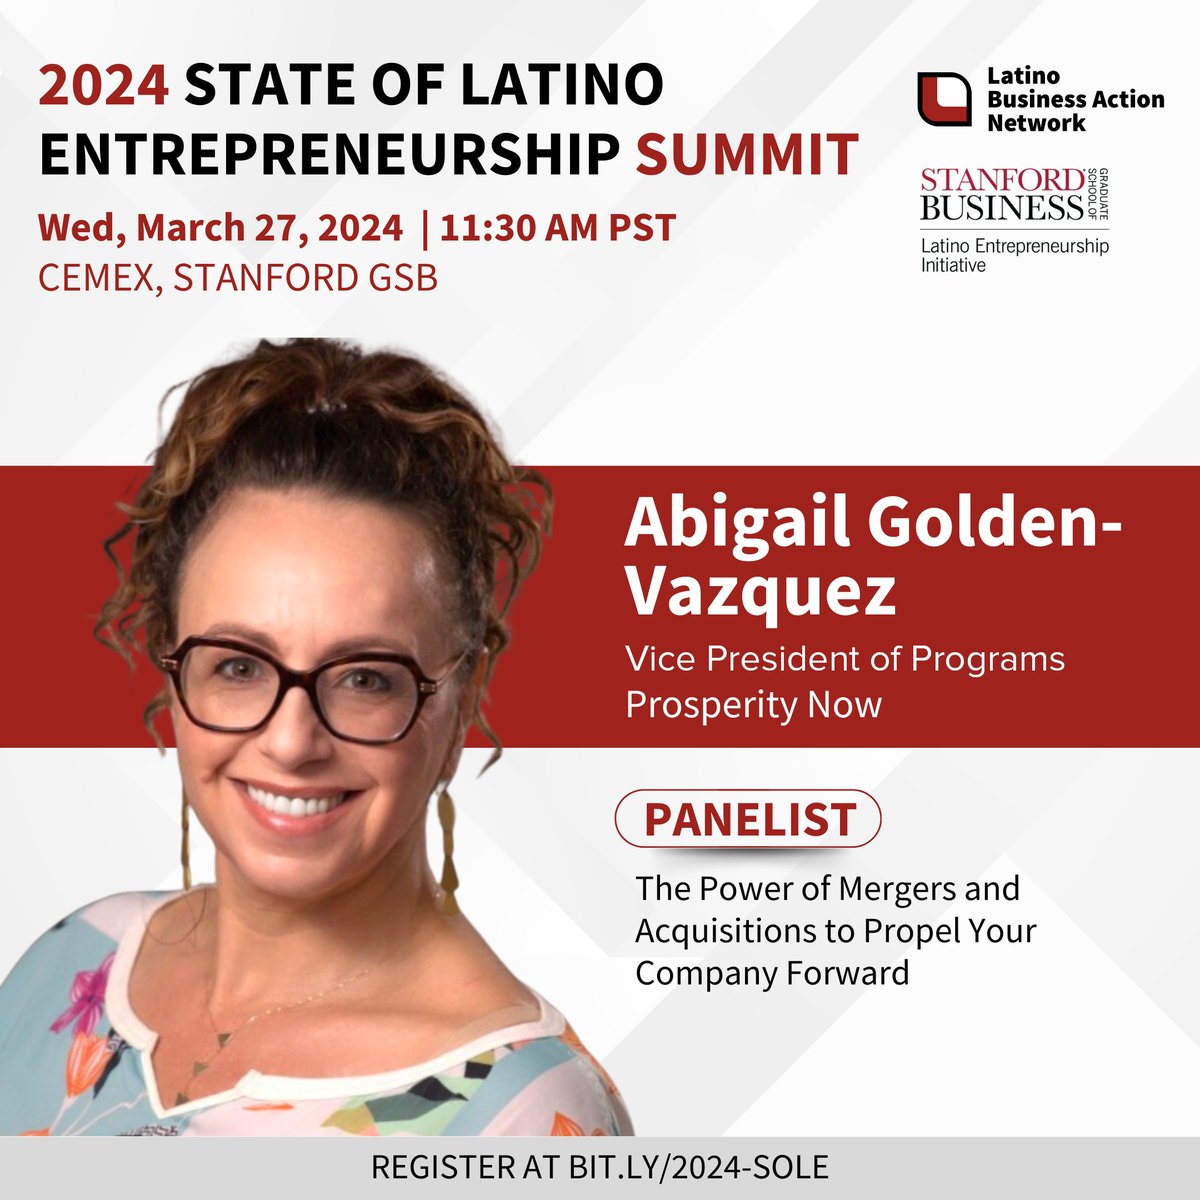 Join us @Stanford for #SOLE2024 on Mar 27! Our VP of Programs will share insights on Latino entrepreneurship, highlighting opportunities & challenges. Network, connect, and celebrate with us! Reserve your spot: zurl.co/Uns0 @LBANstrong #LatinoEntrepreneurship